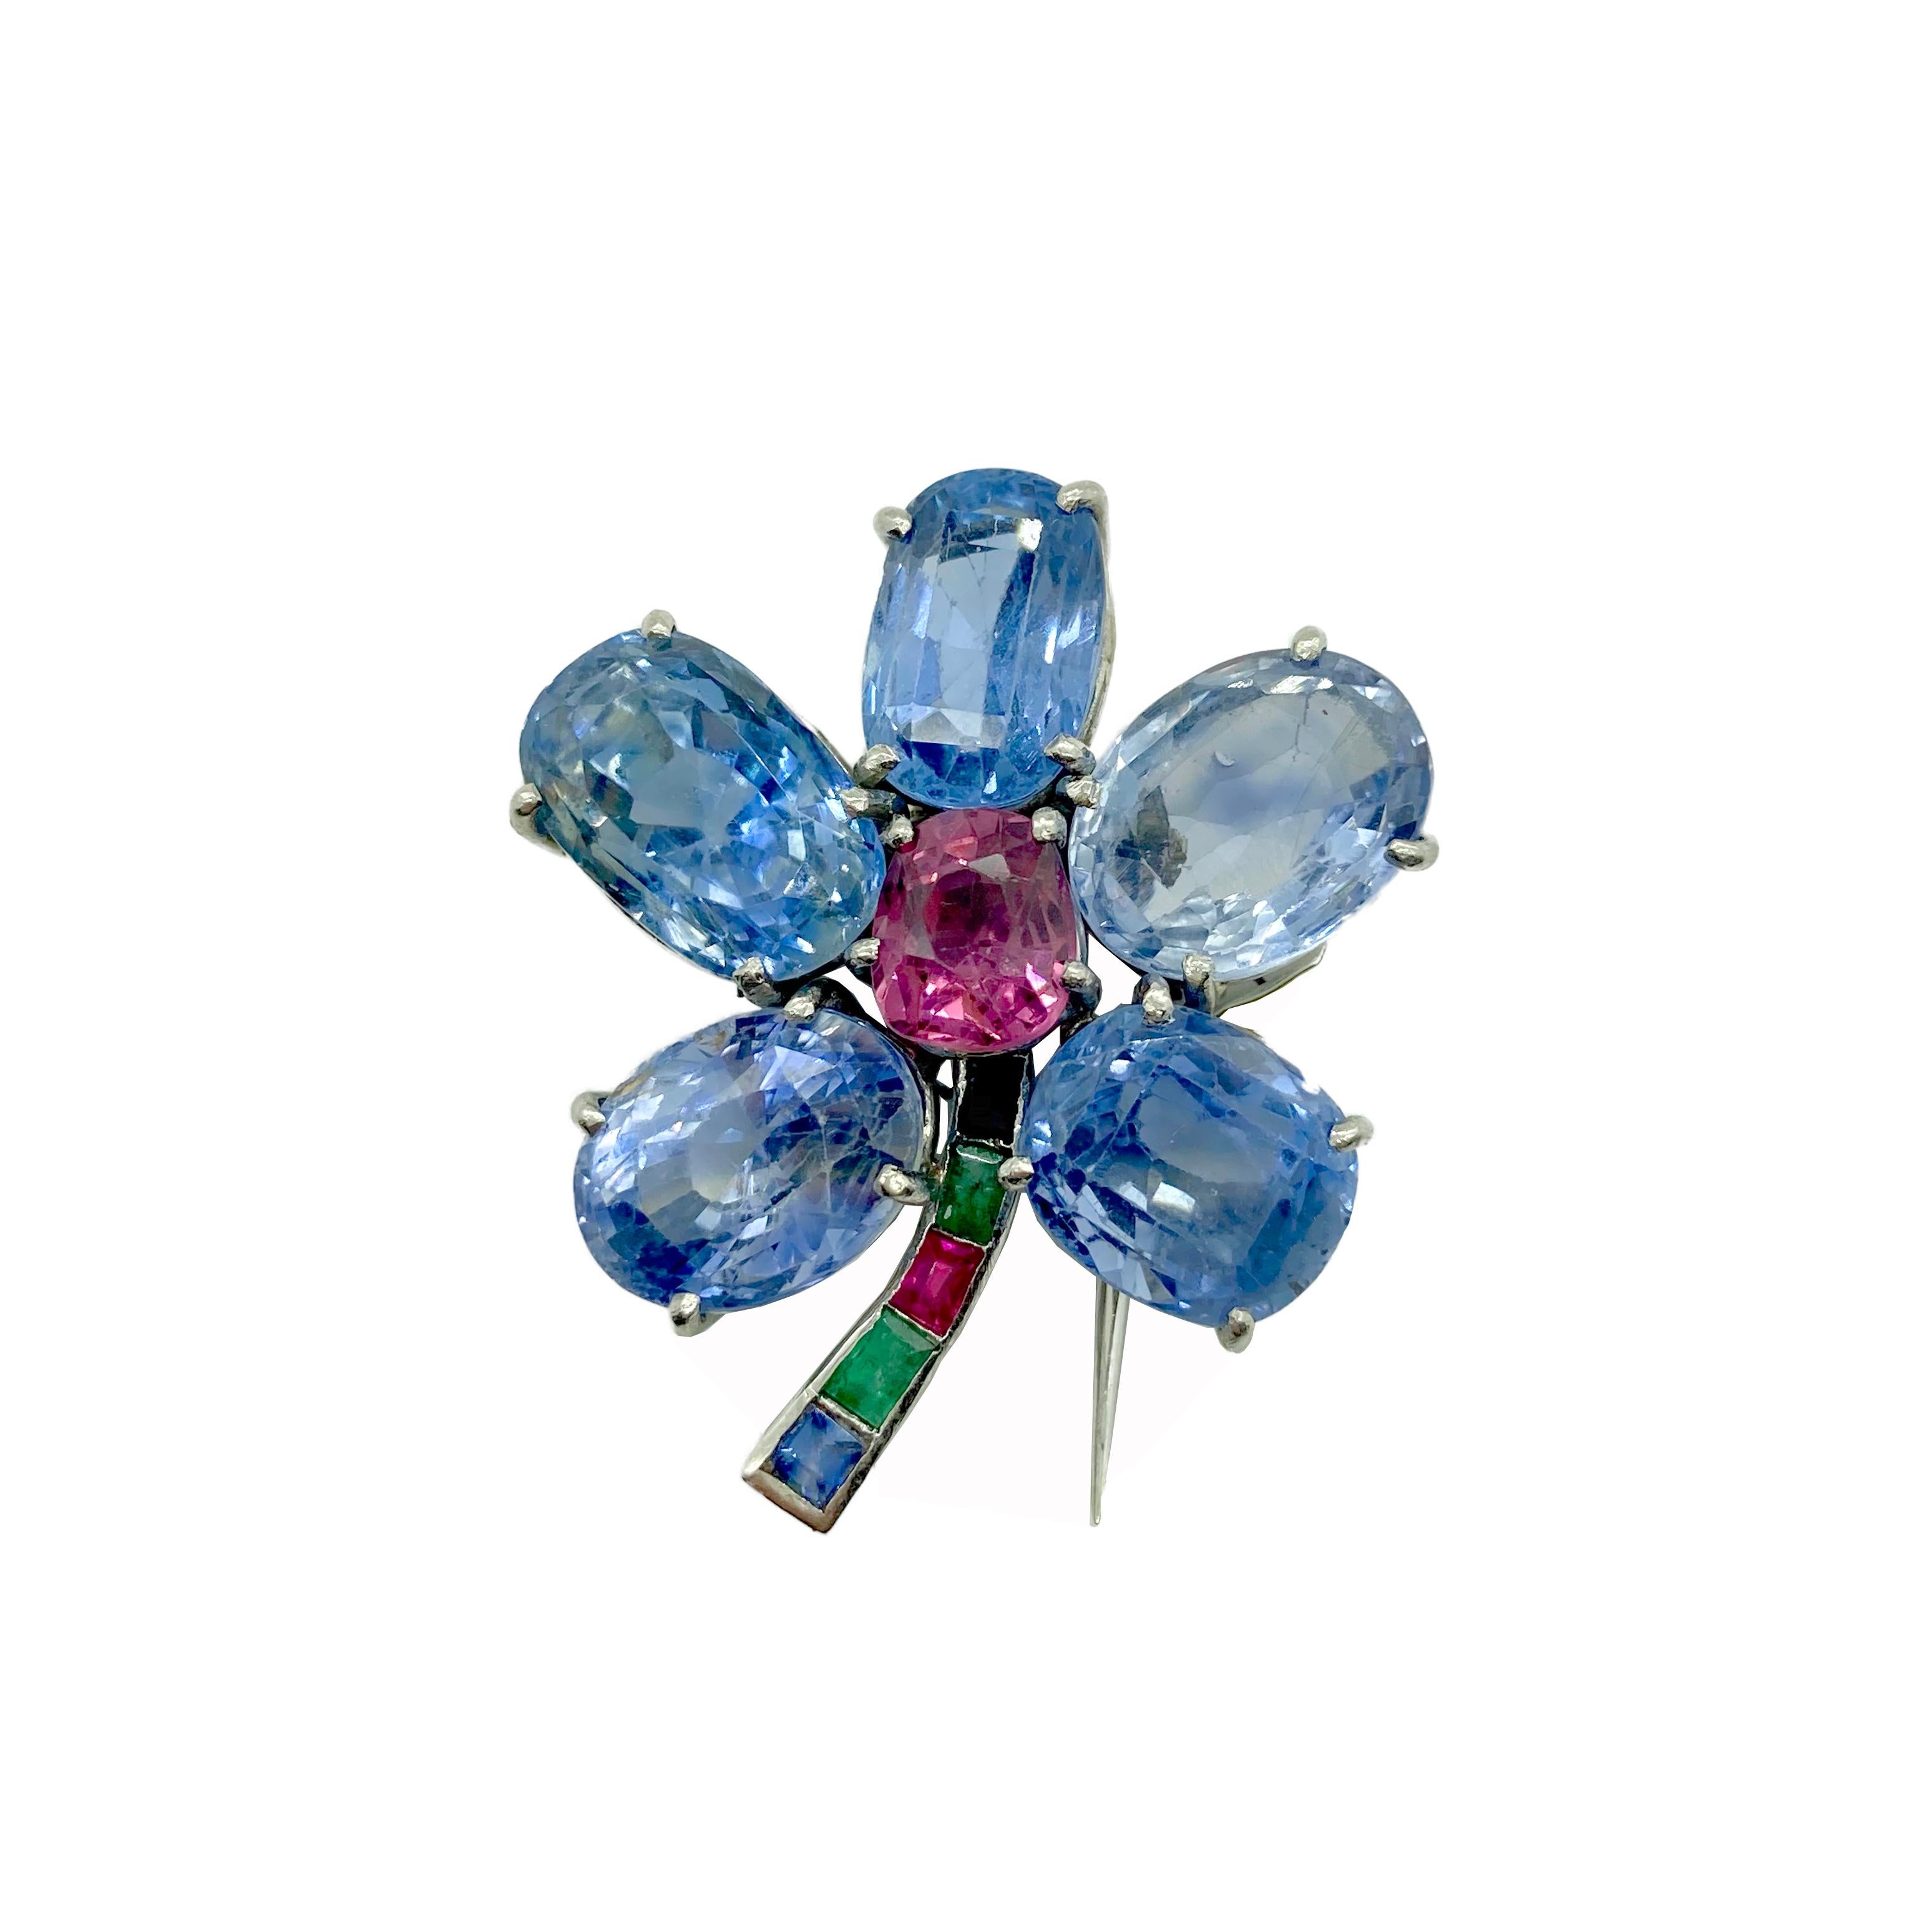 A chic retro Cartier flower brooch with sapphires, emeralds, and rubies. Circa 1940s.